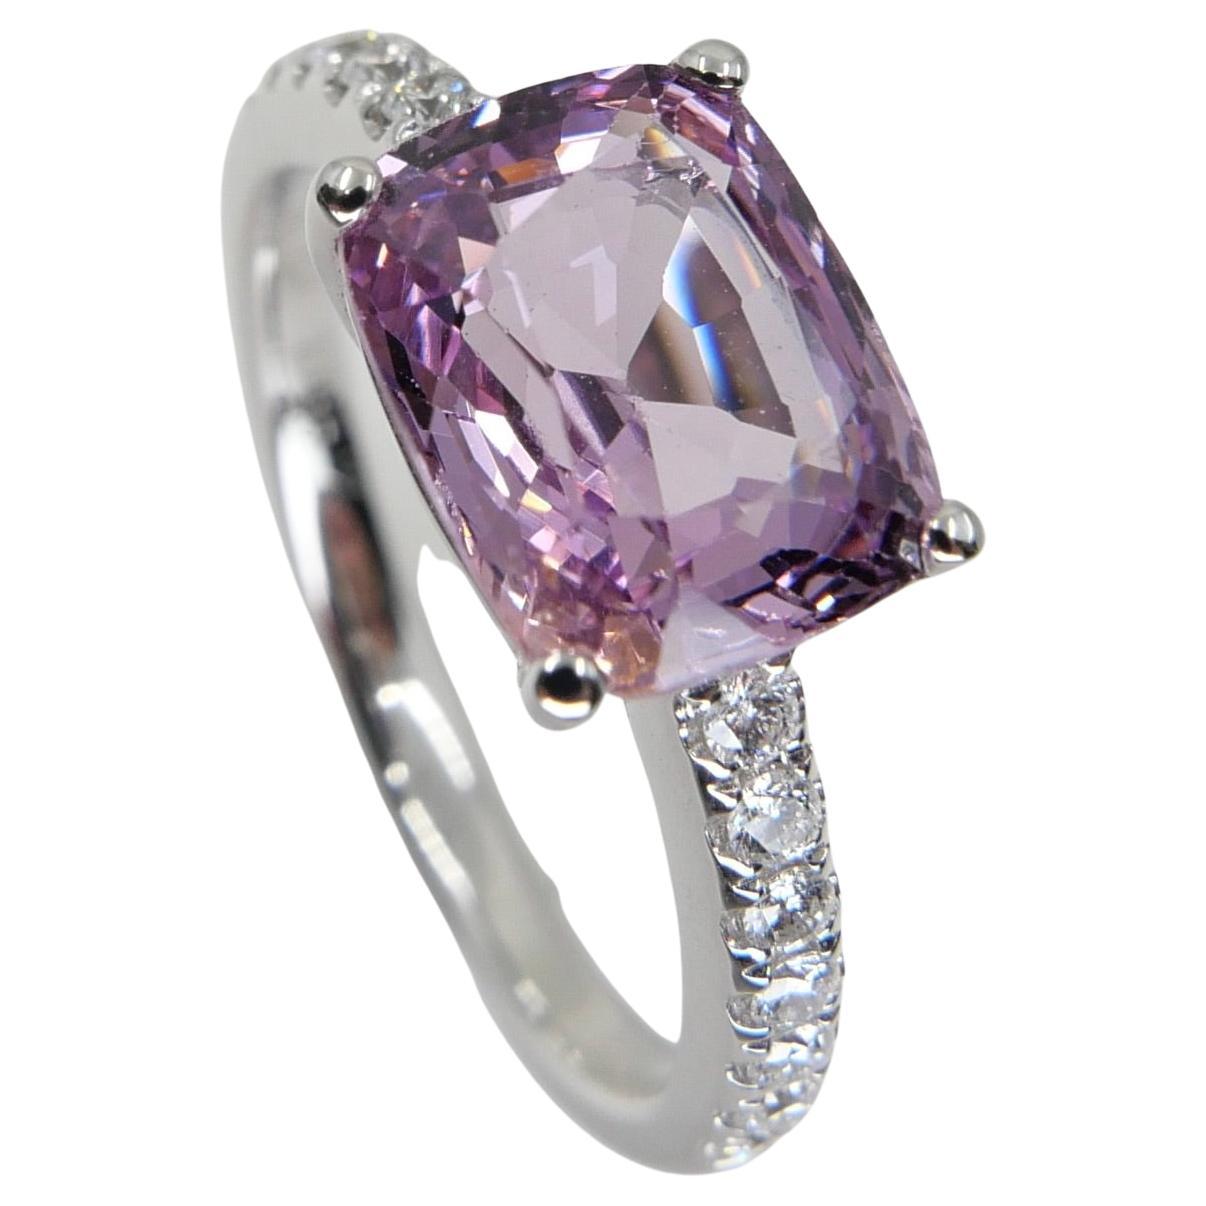 Cushion Cut Natural 2.99 Carat Pink Spinel and Diamond Cocktail Ring Set in 18 Karat Gold For Sale